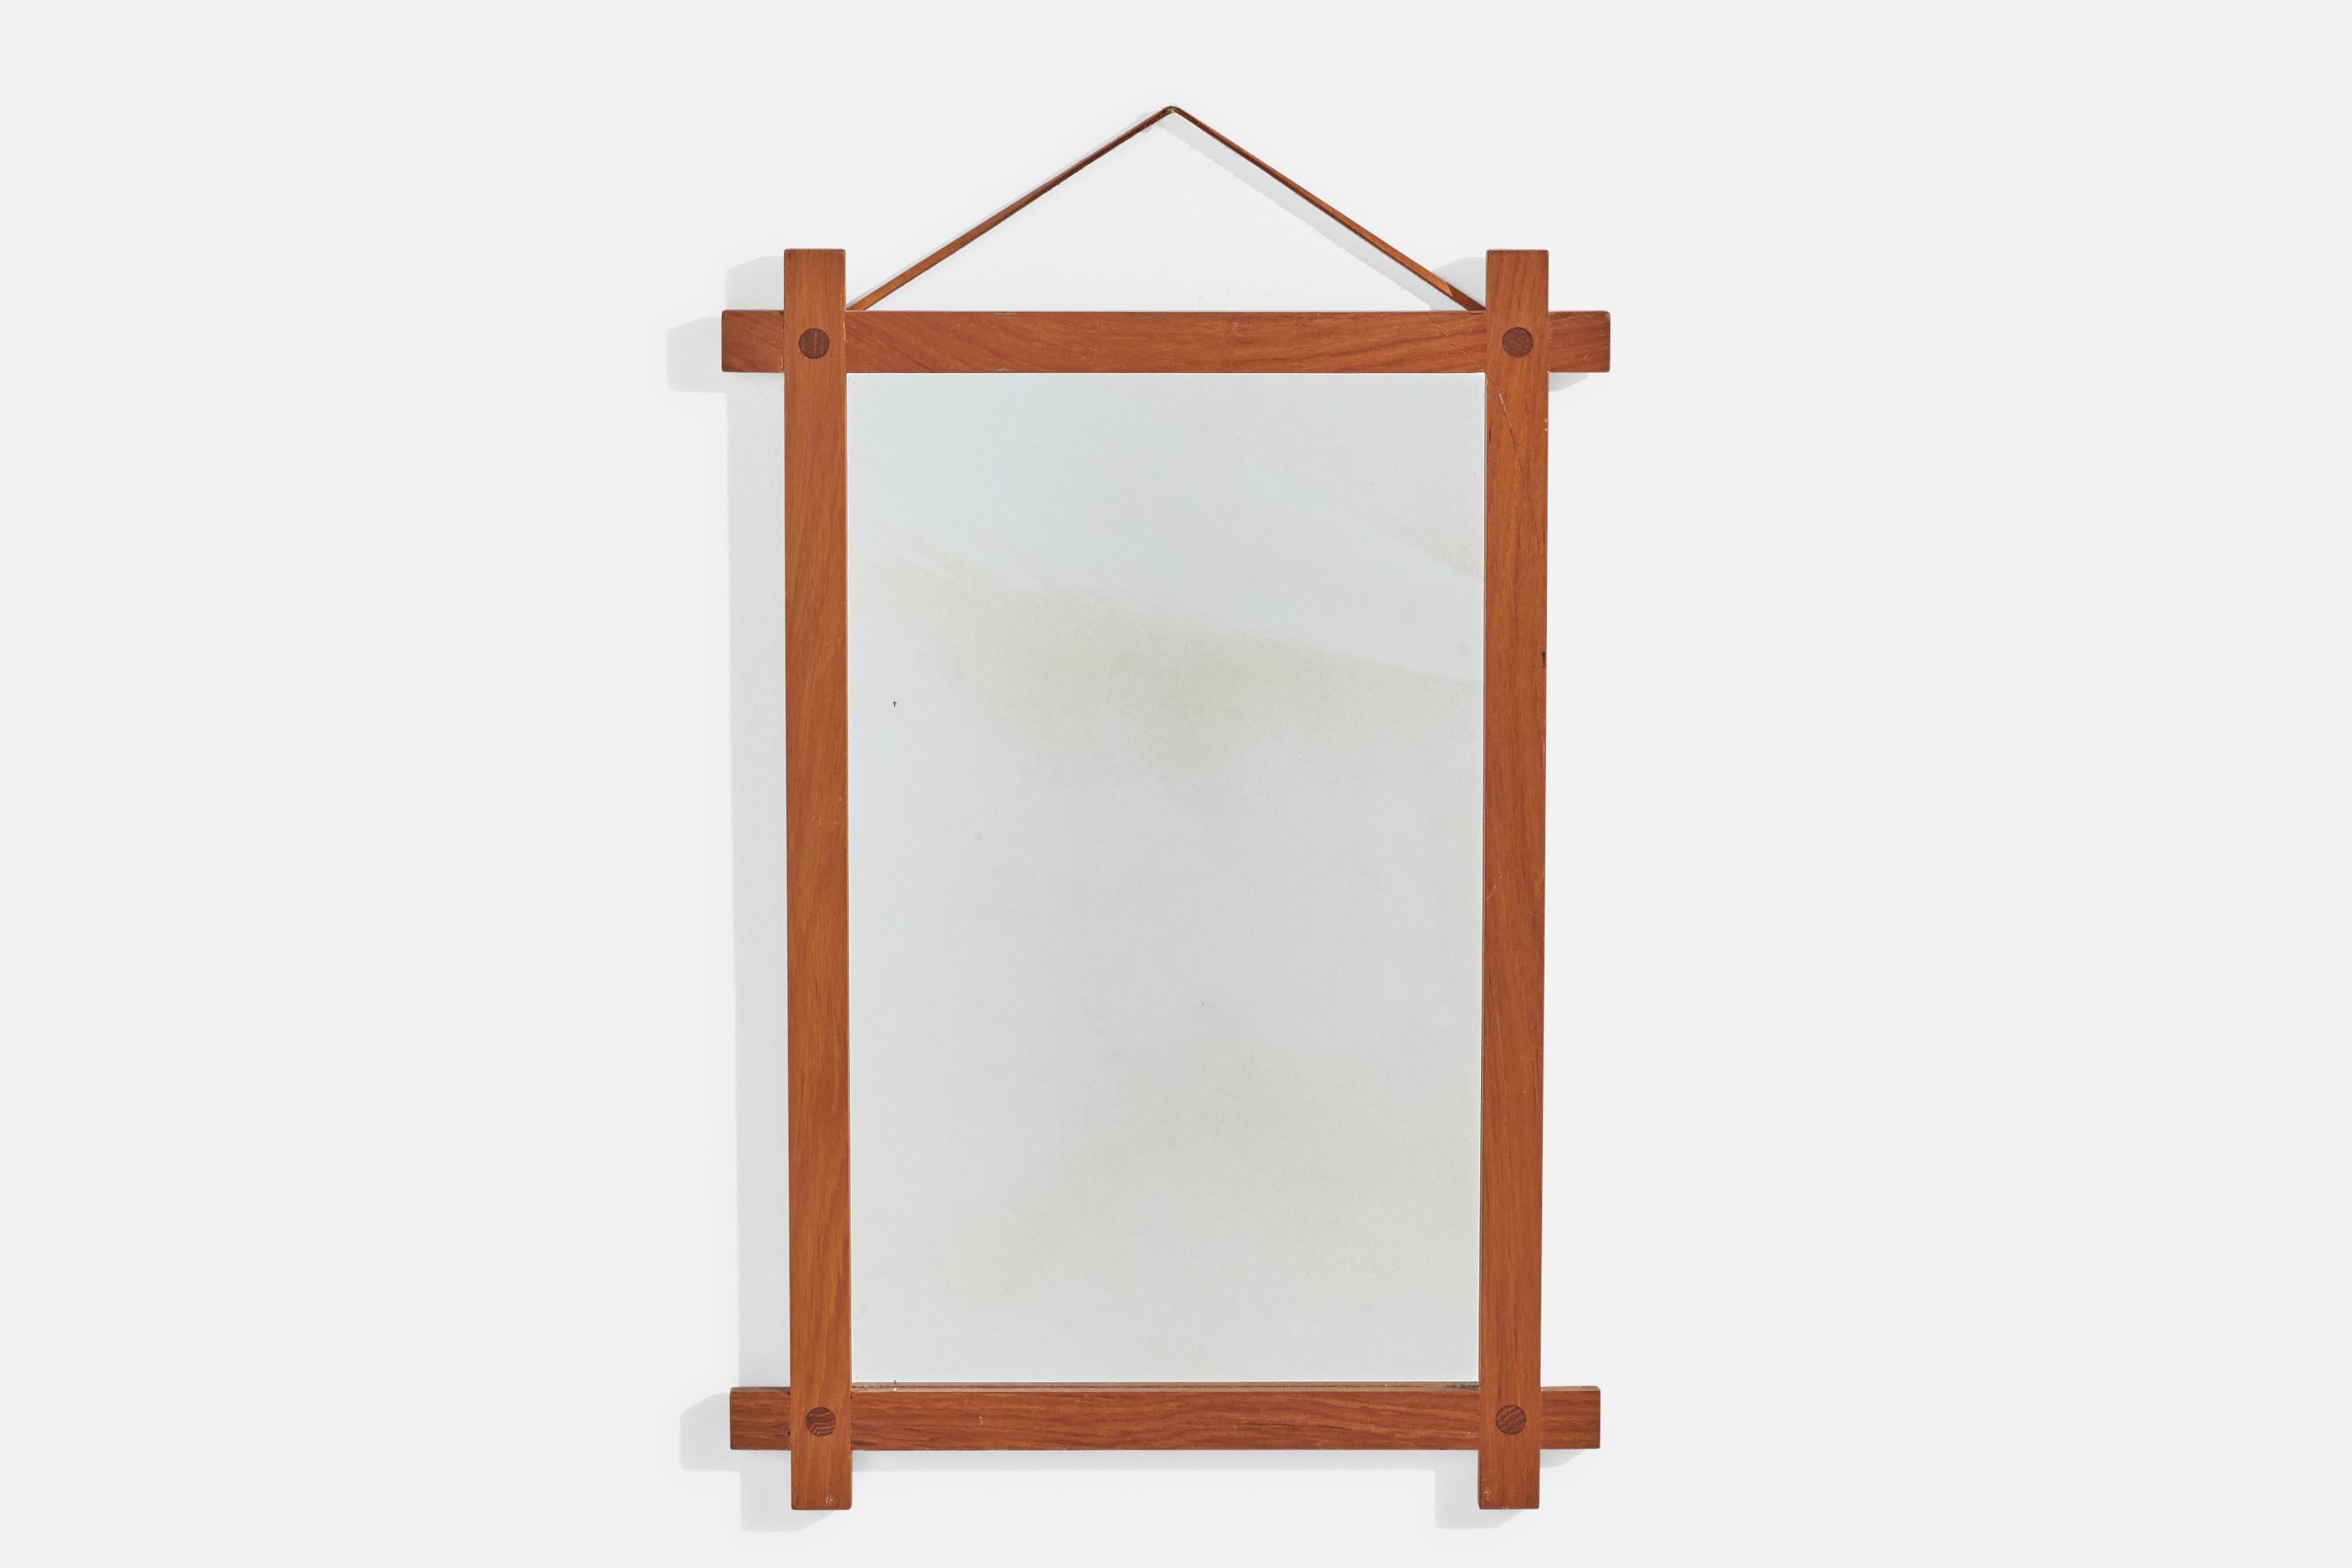 A solid teak and leather wall mirror designed and produced by Fröseke, AB Nybrofabriken, Sweden, 1960s. Labeled.

